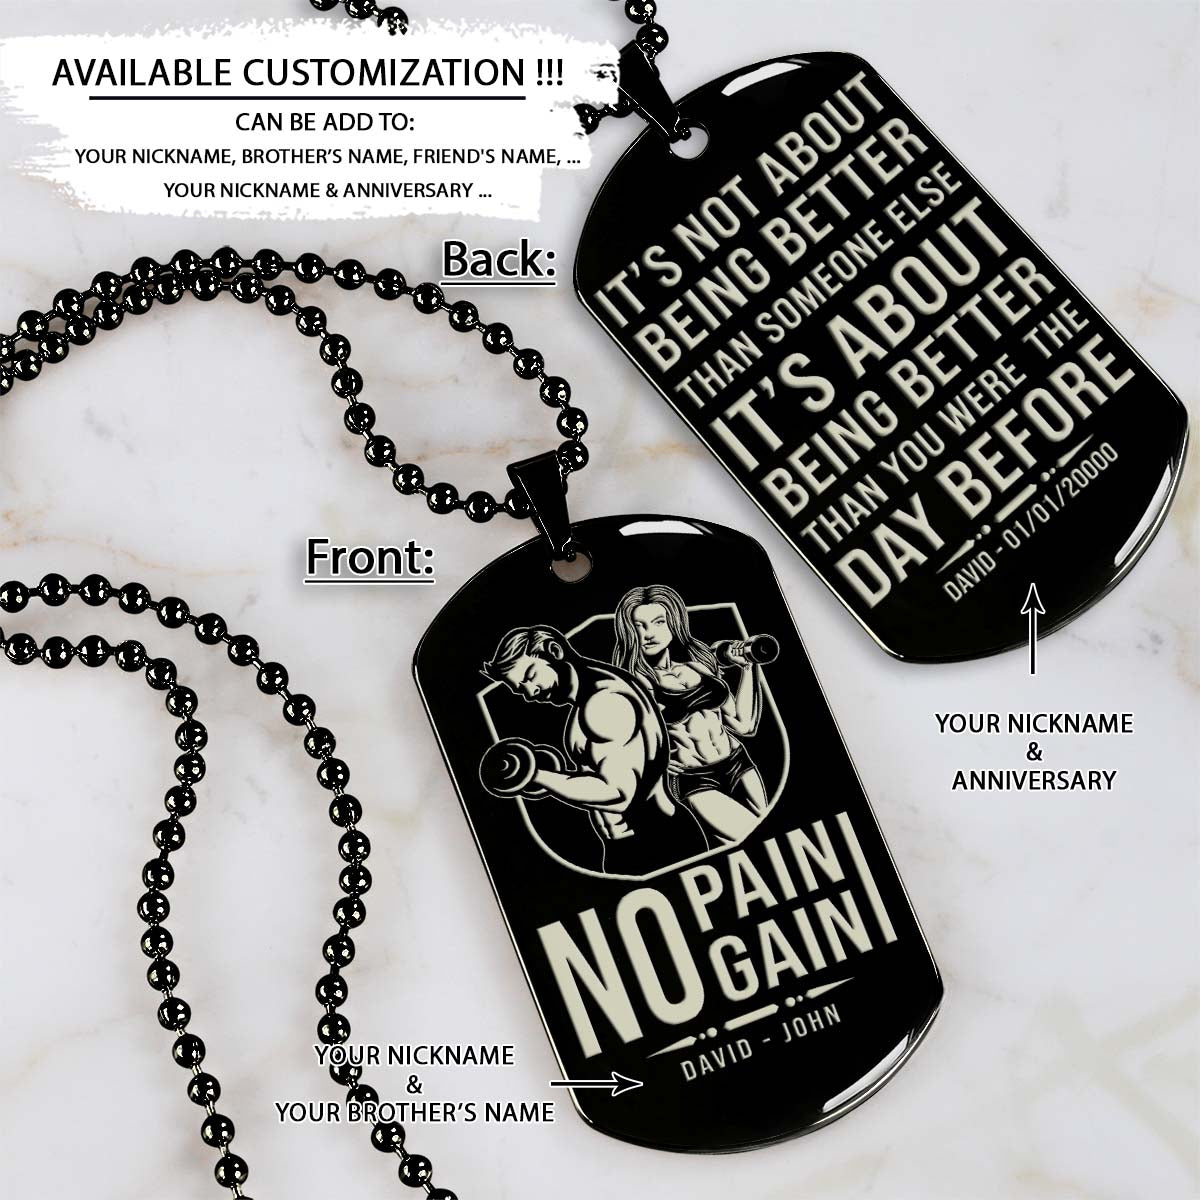 GYMD016 - No Pain - No Gain - It's About Being Better Than You Were The Day Before - Gym - Fitness Center - Workout - Gym Dog Tag - Gym Necklace - Black Engrave Dog Tag